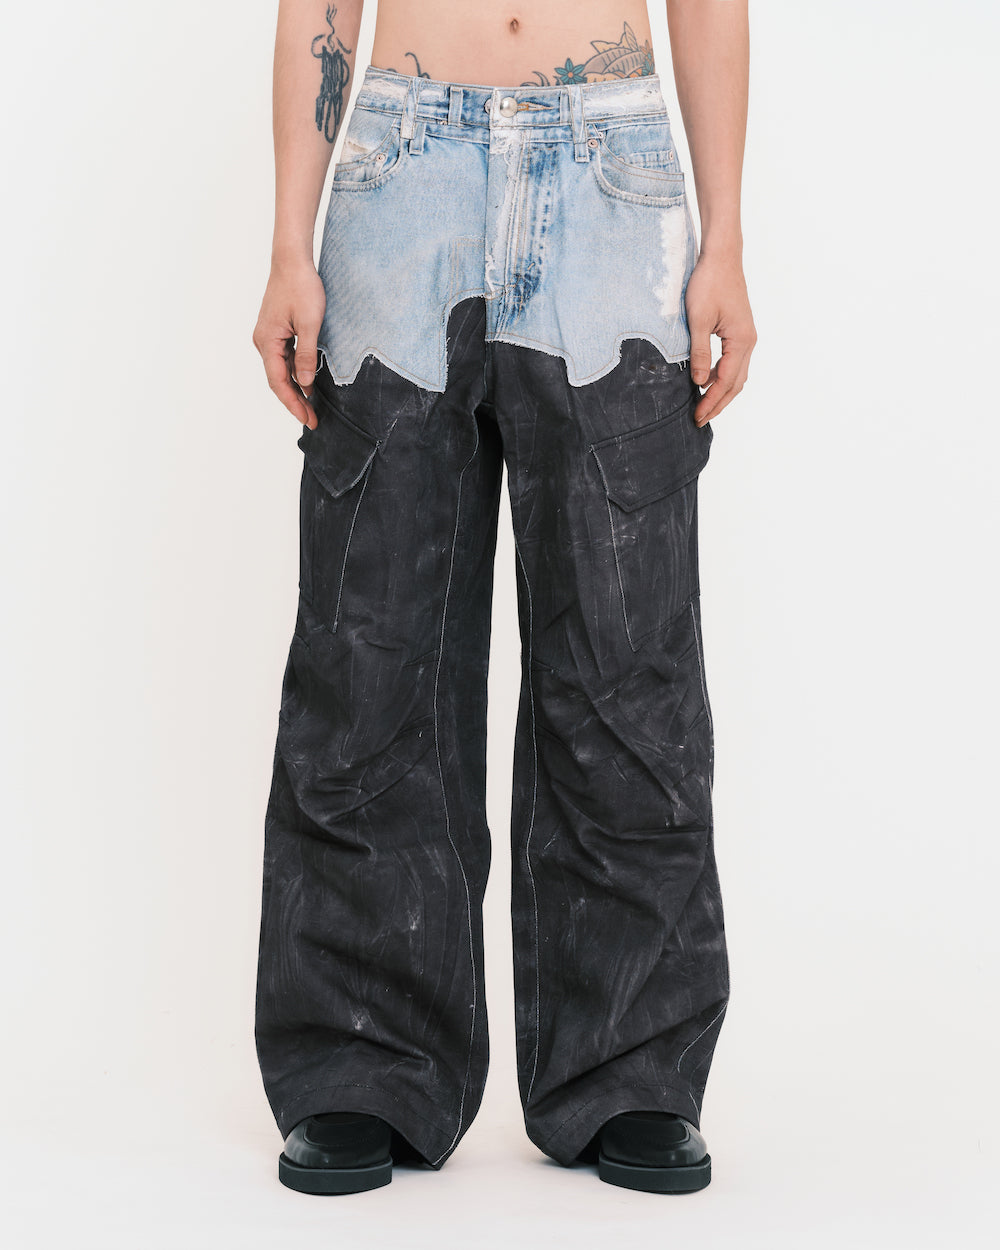 Faux-Denim & Scratch Leather Printed Cargo-Pants